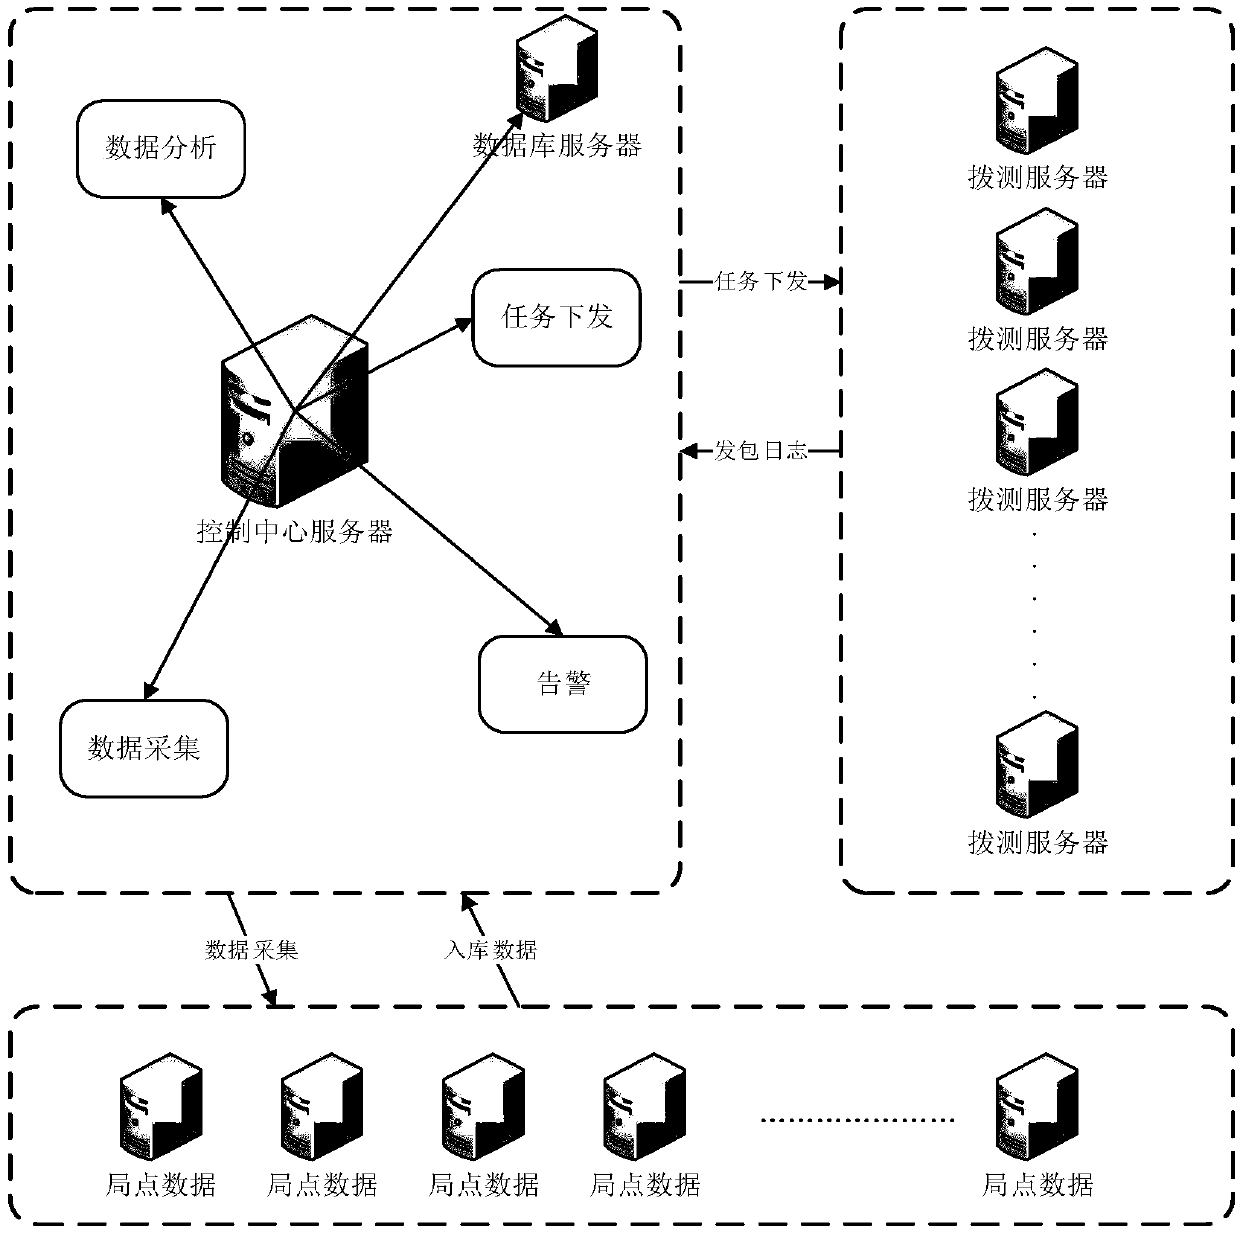 Service monitoring method and system for cloud service infrastructure